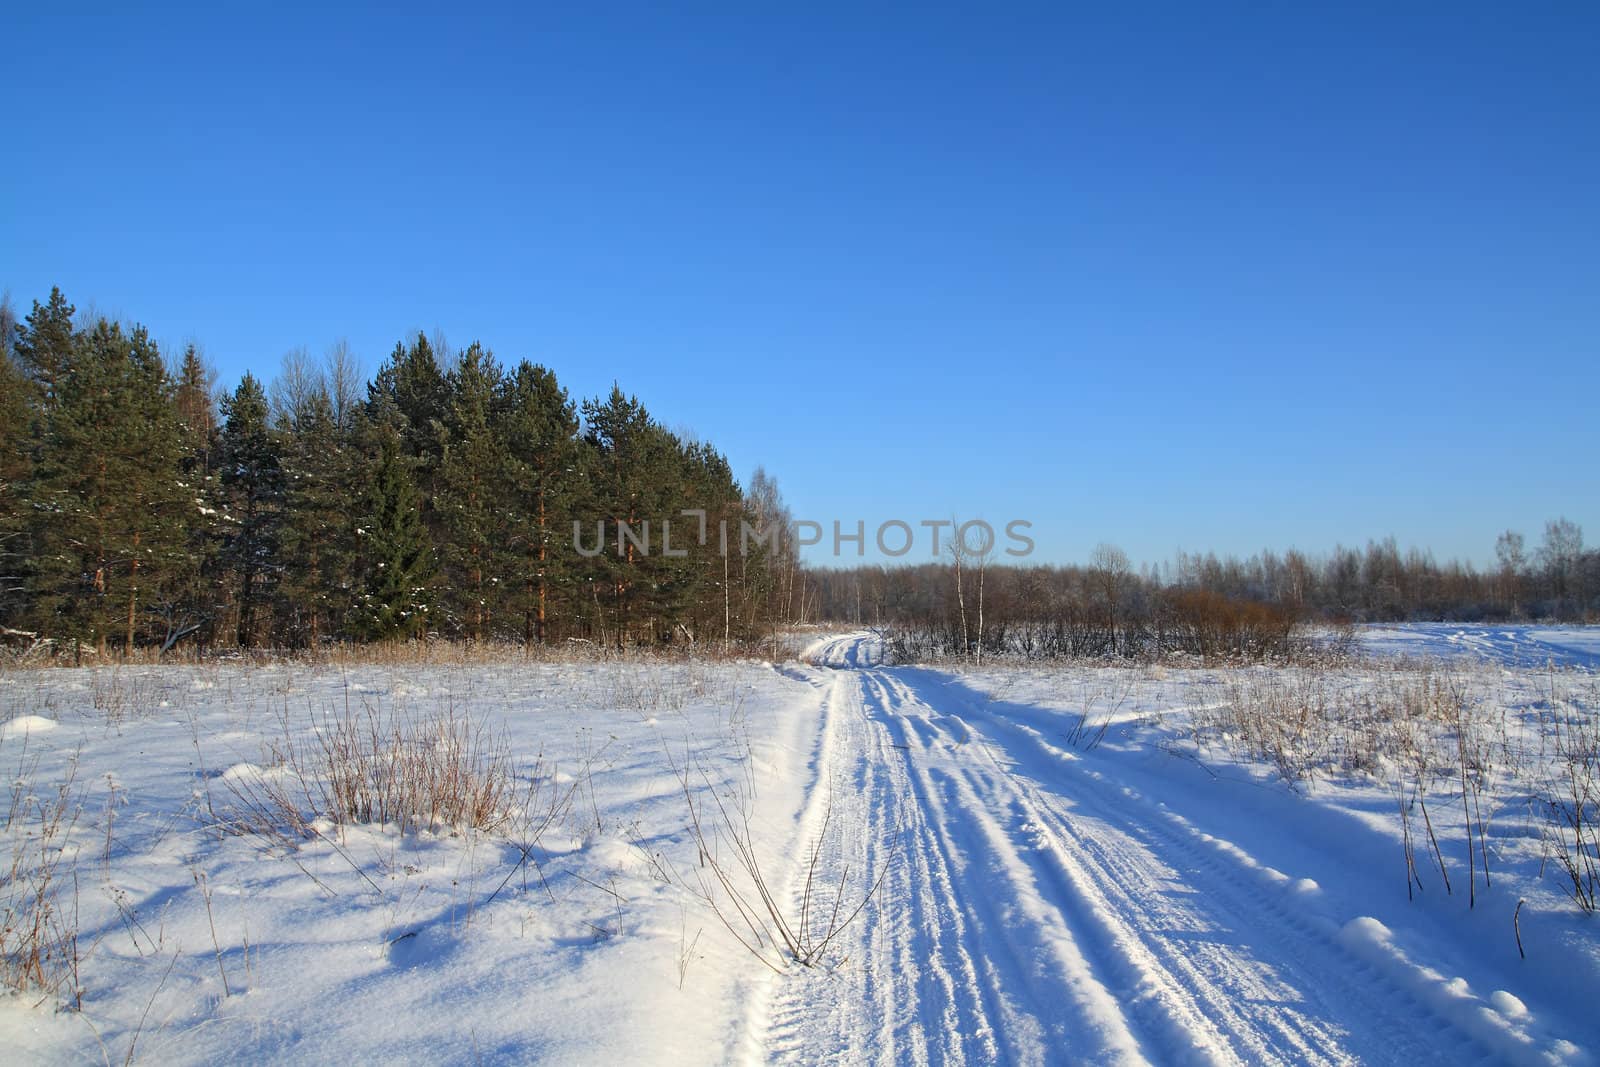 snow road near pine wood by basel101658